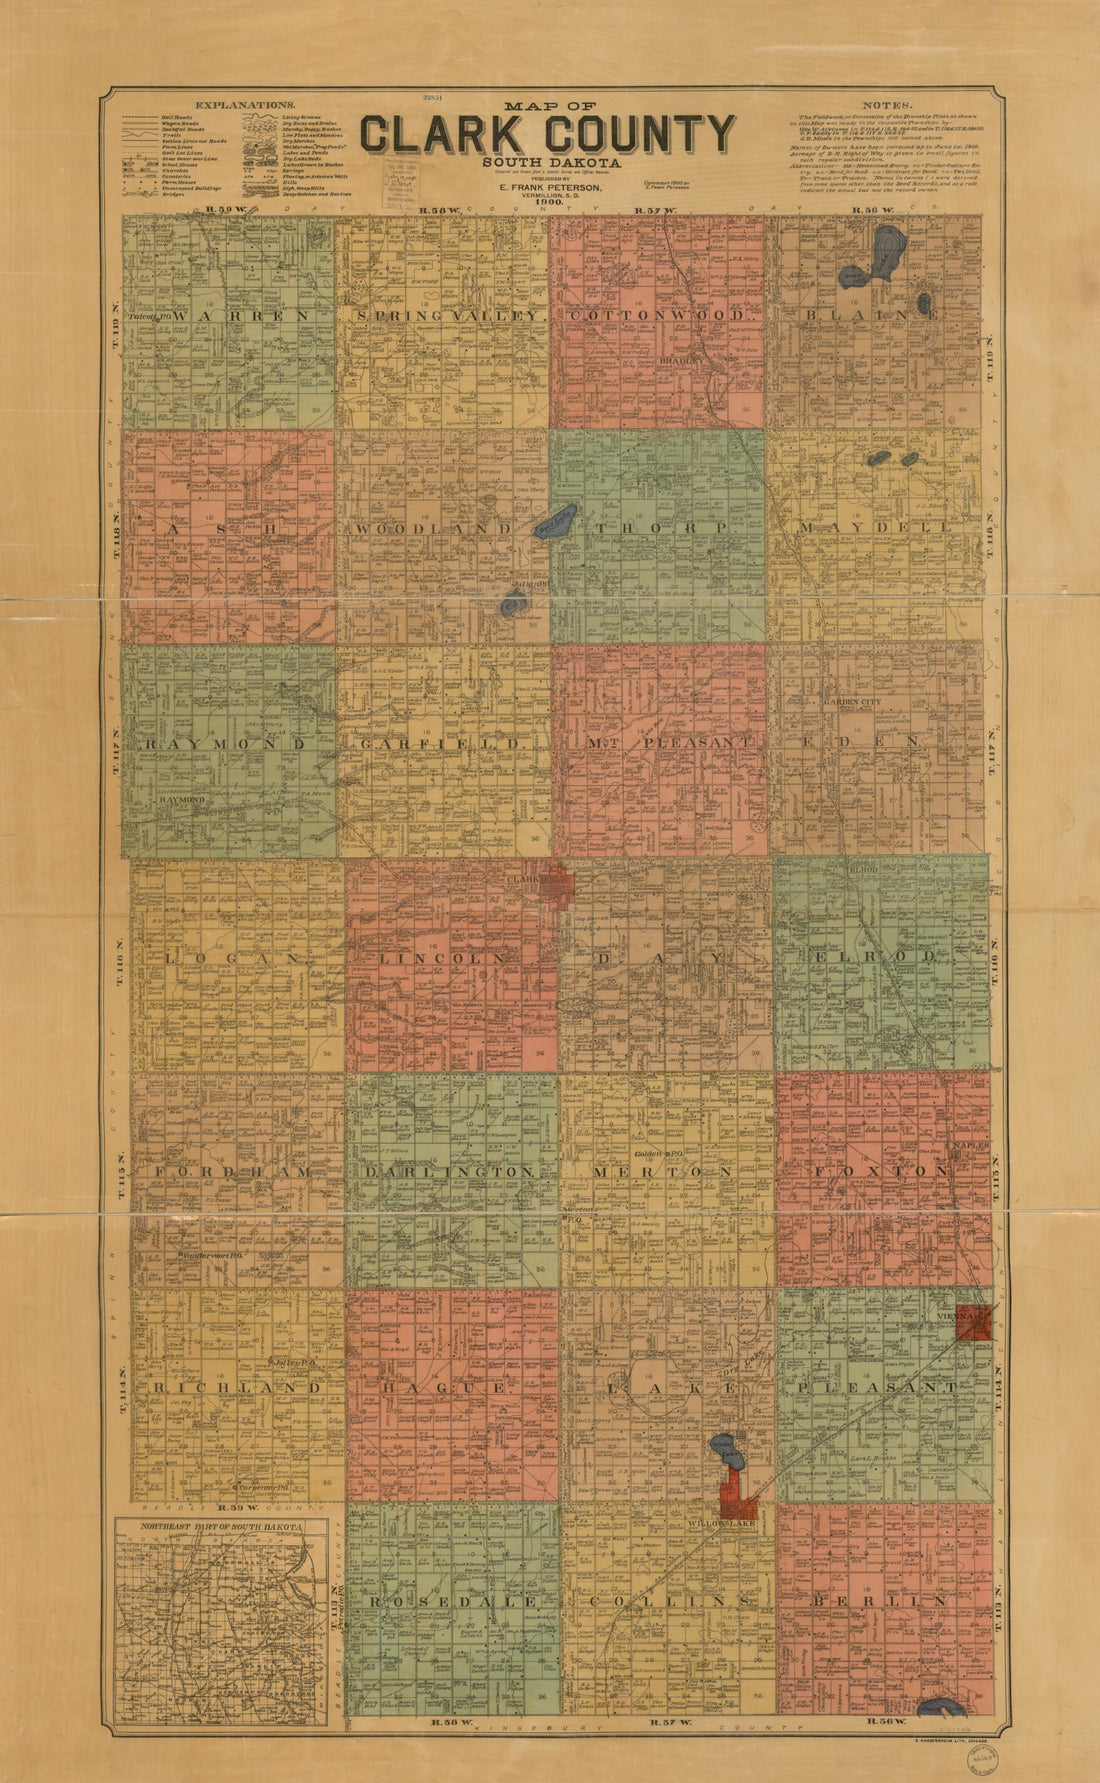 This old map of Map of Clark County, South Dakota : Compiled and Drawn from a Special Survey and Official Records from 1900 was created by E. Frank Peterson, S. Wangersheim in 1900